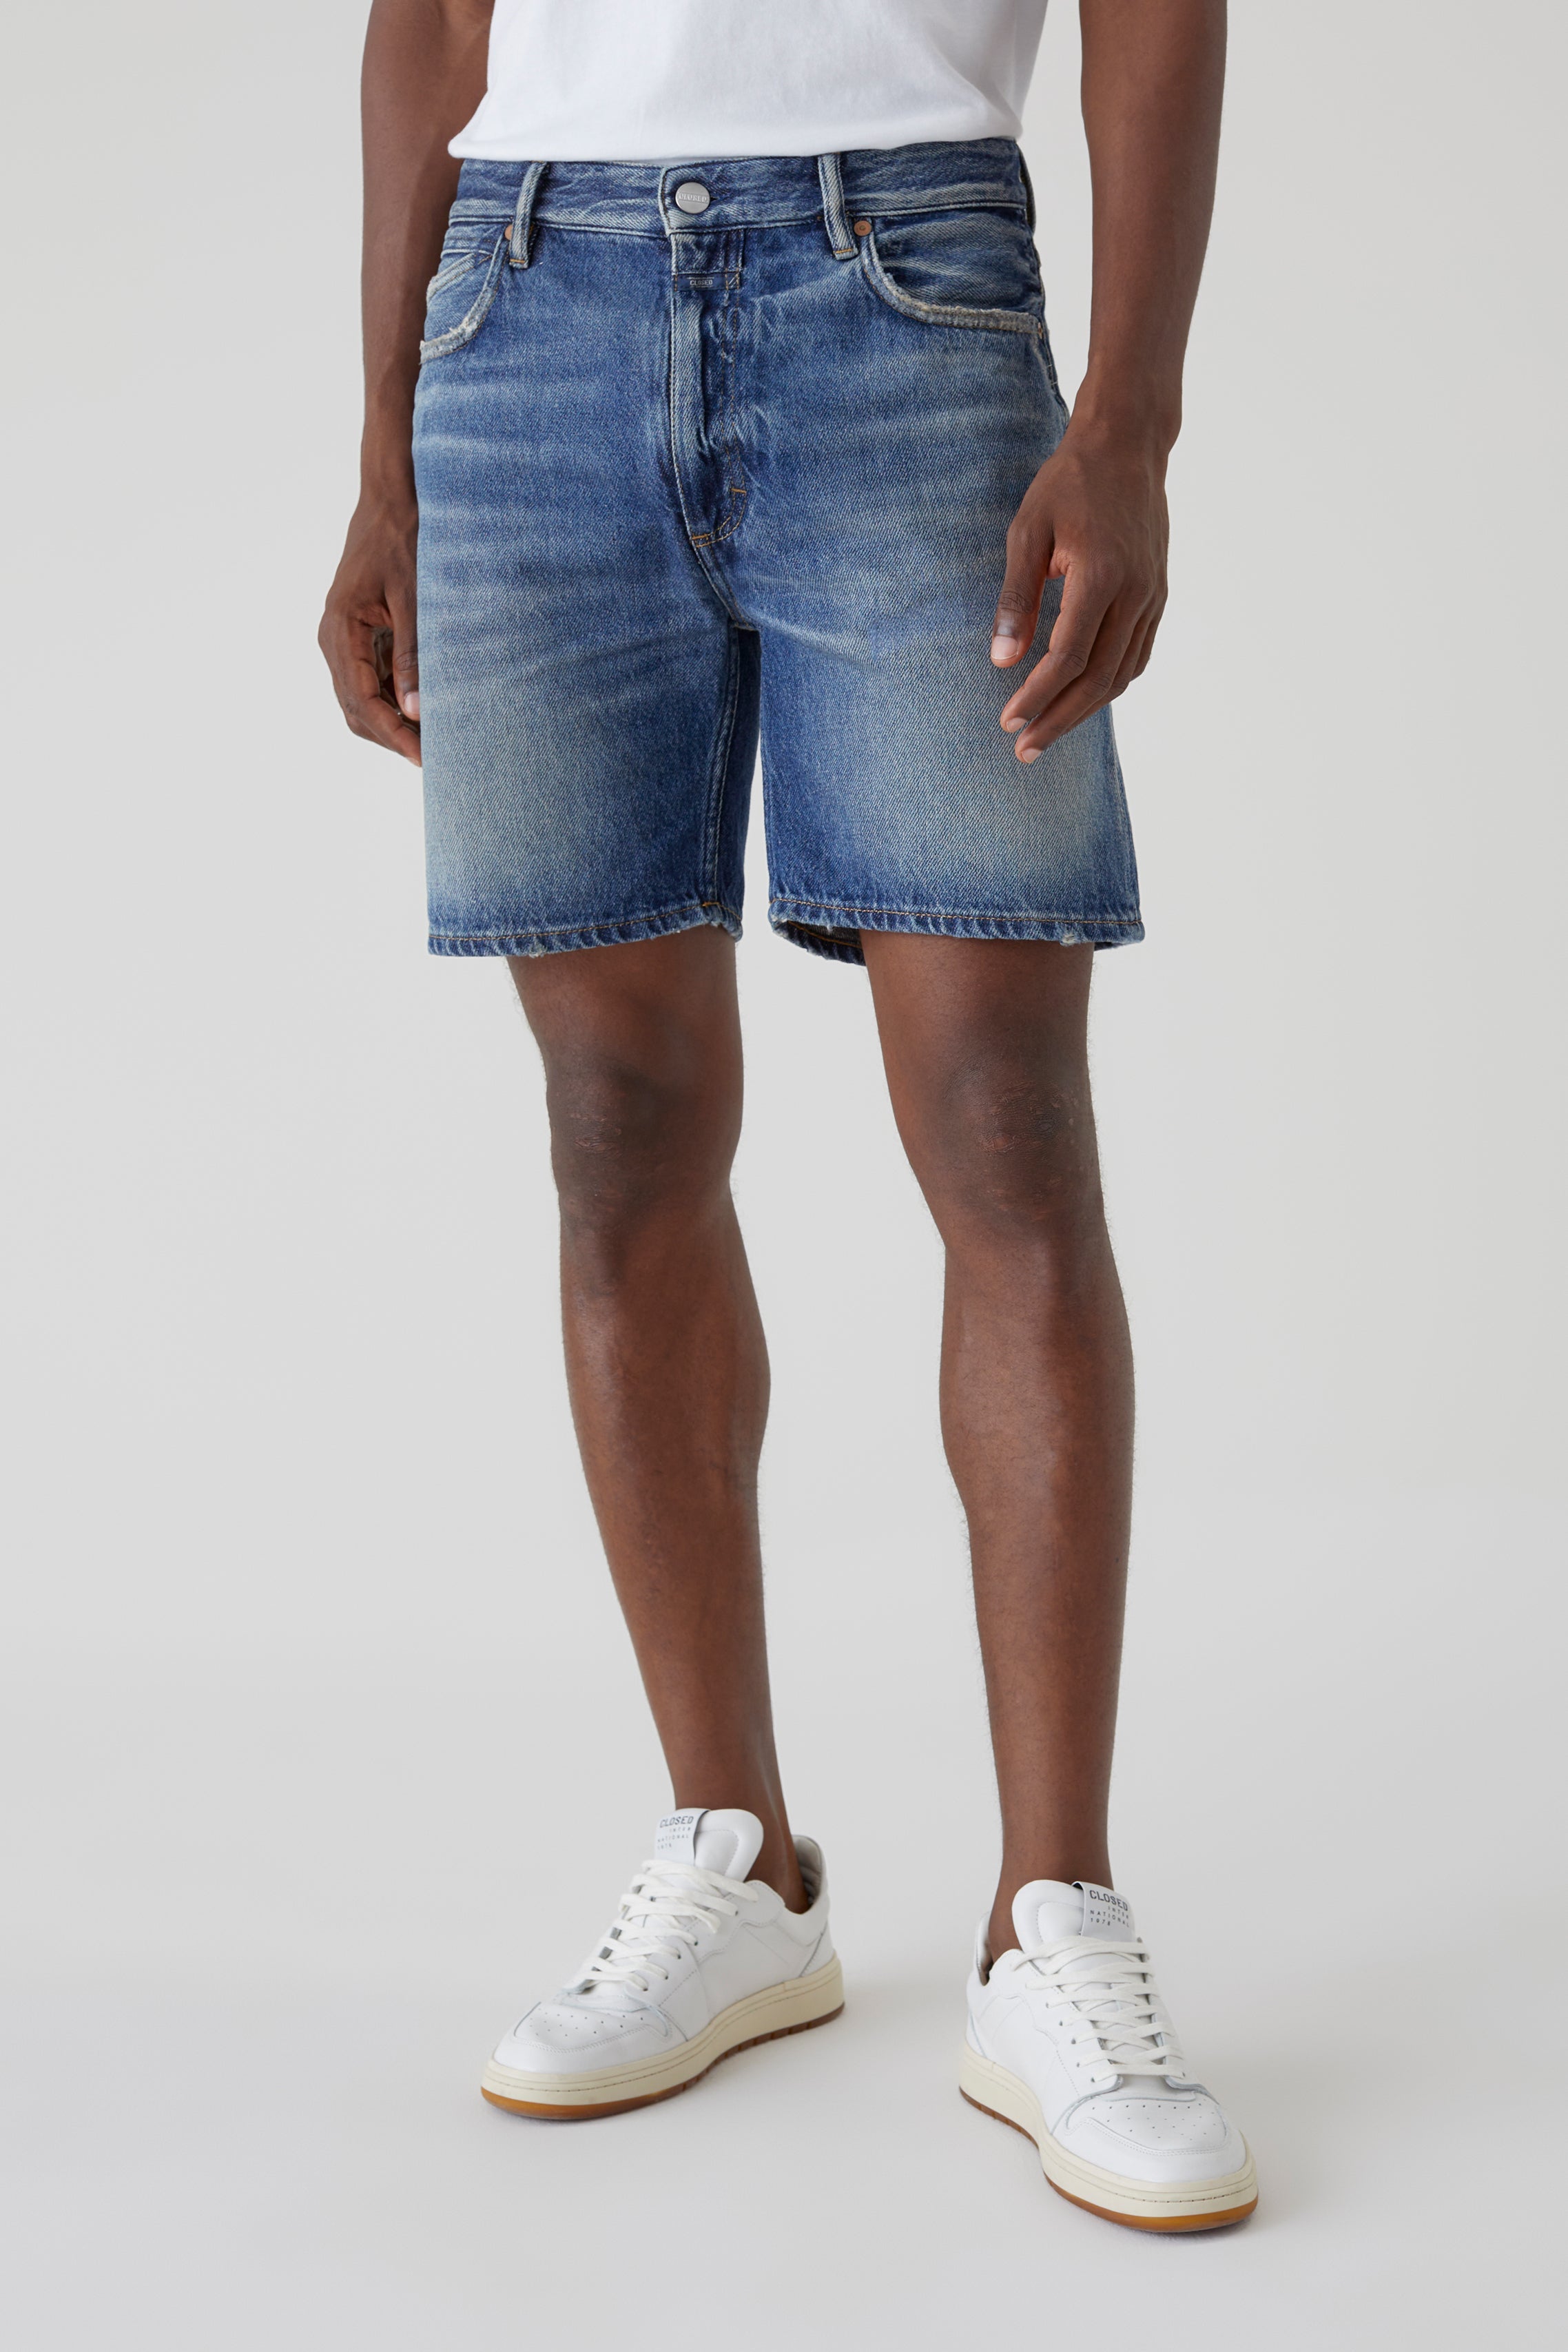 CLOSED-OUTLET-SALE-STYLE-NAME-BOGUS-SHORTS-Hosen-ARCHIVE-COLLECTION-2_17b77a00-452d-4263-adcc-7fdd5143e75d.jpg